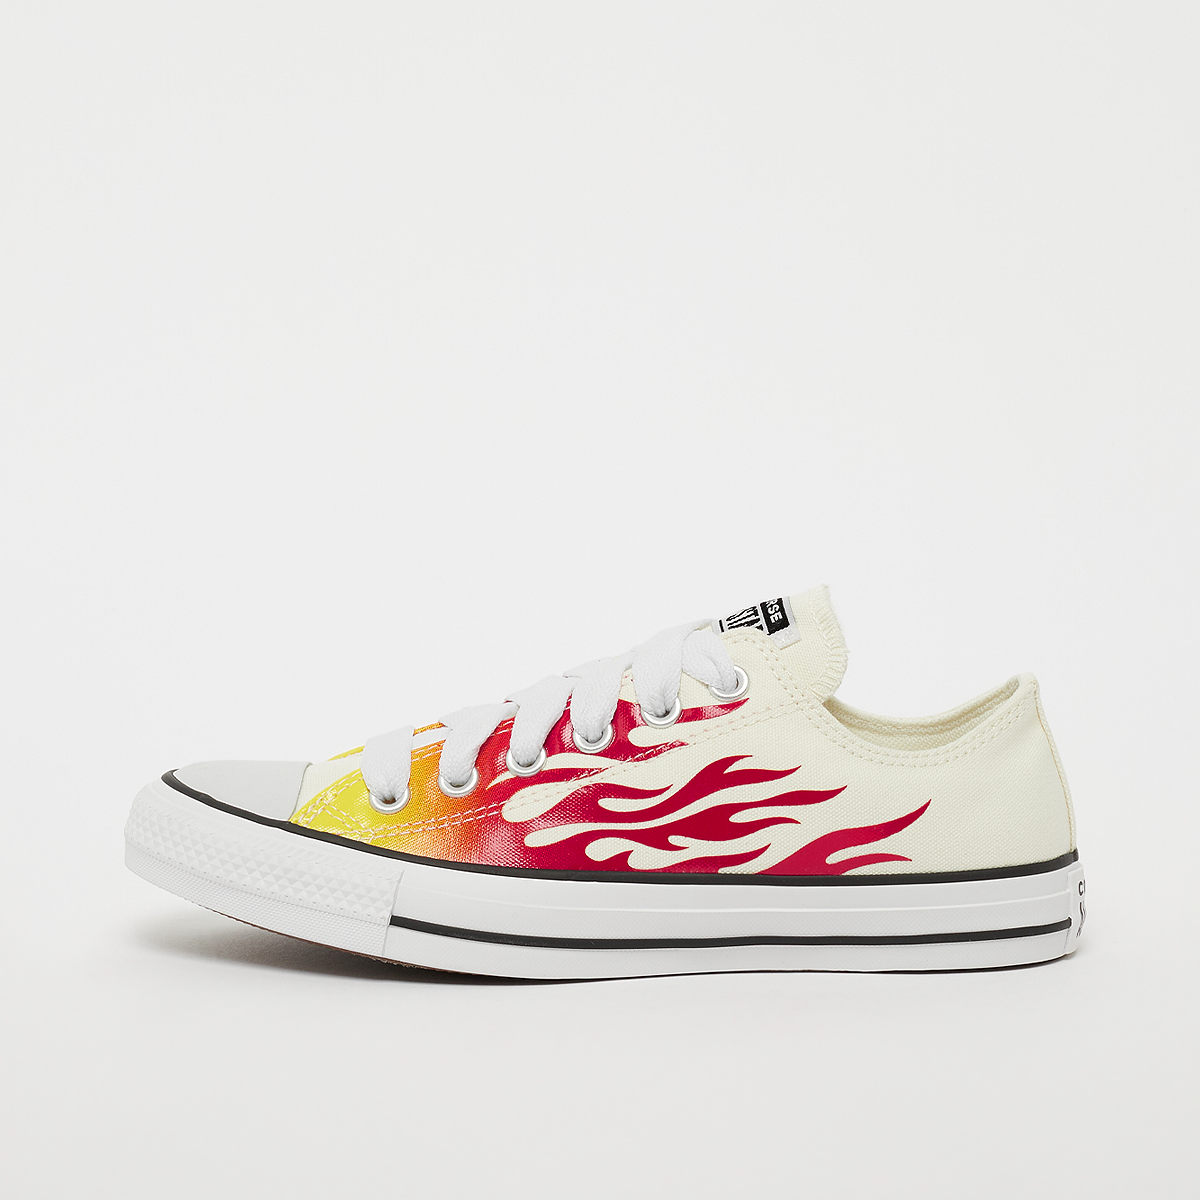 Chuck Taylor All Star, Converse, Footwear, egret/enamel red/fresh yellow, taille: 36.5